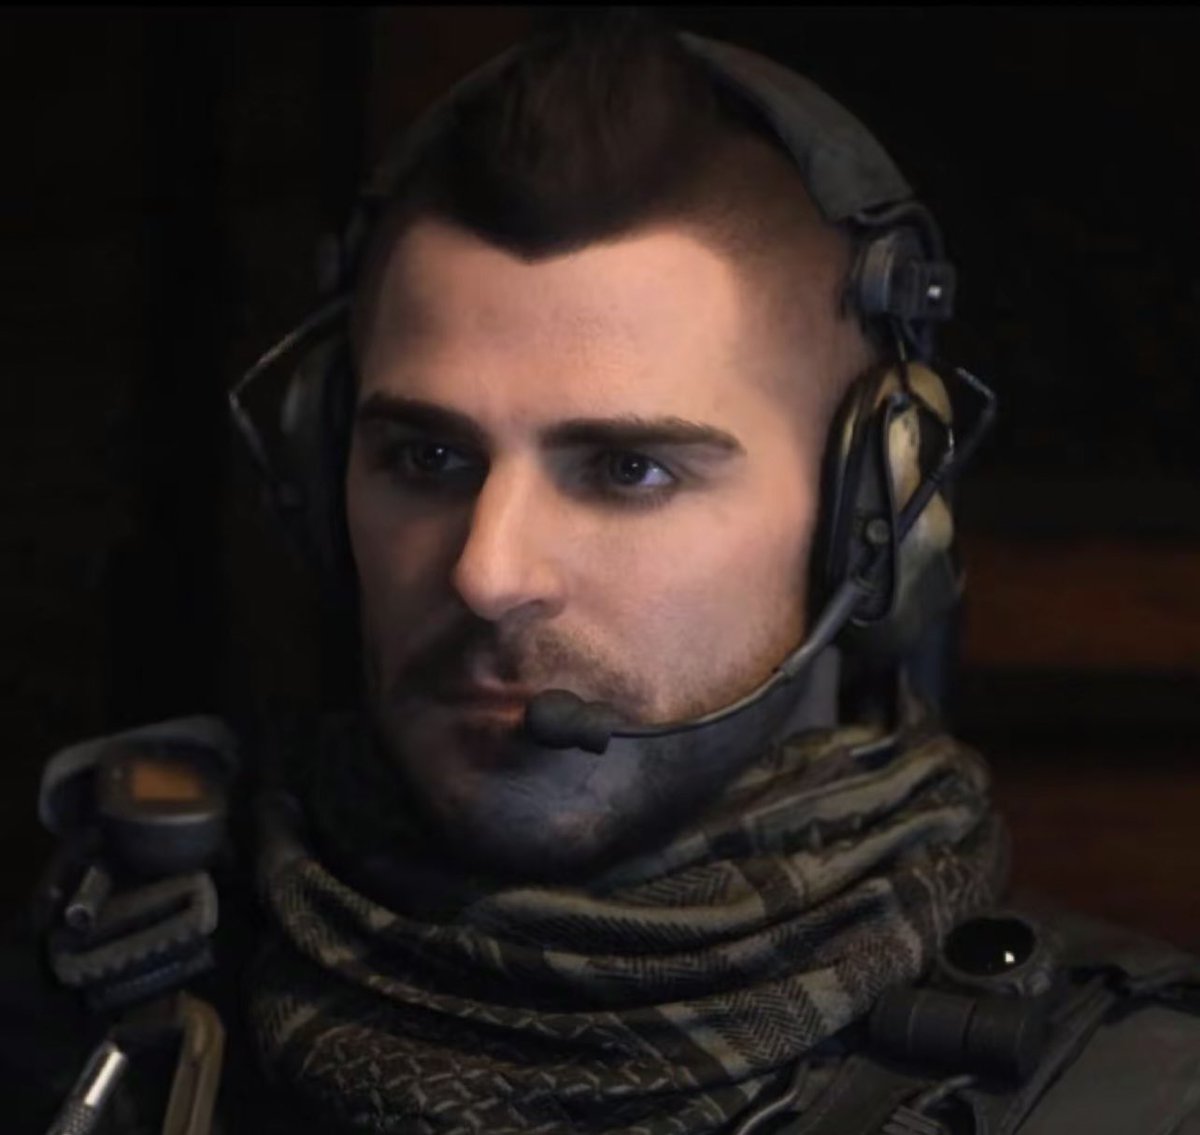 don't freak out but doesn't neil ellice look like soap mactavish from call of duty 🤔